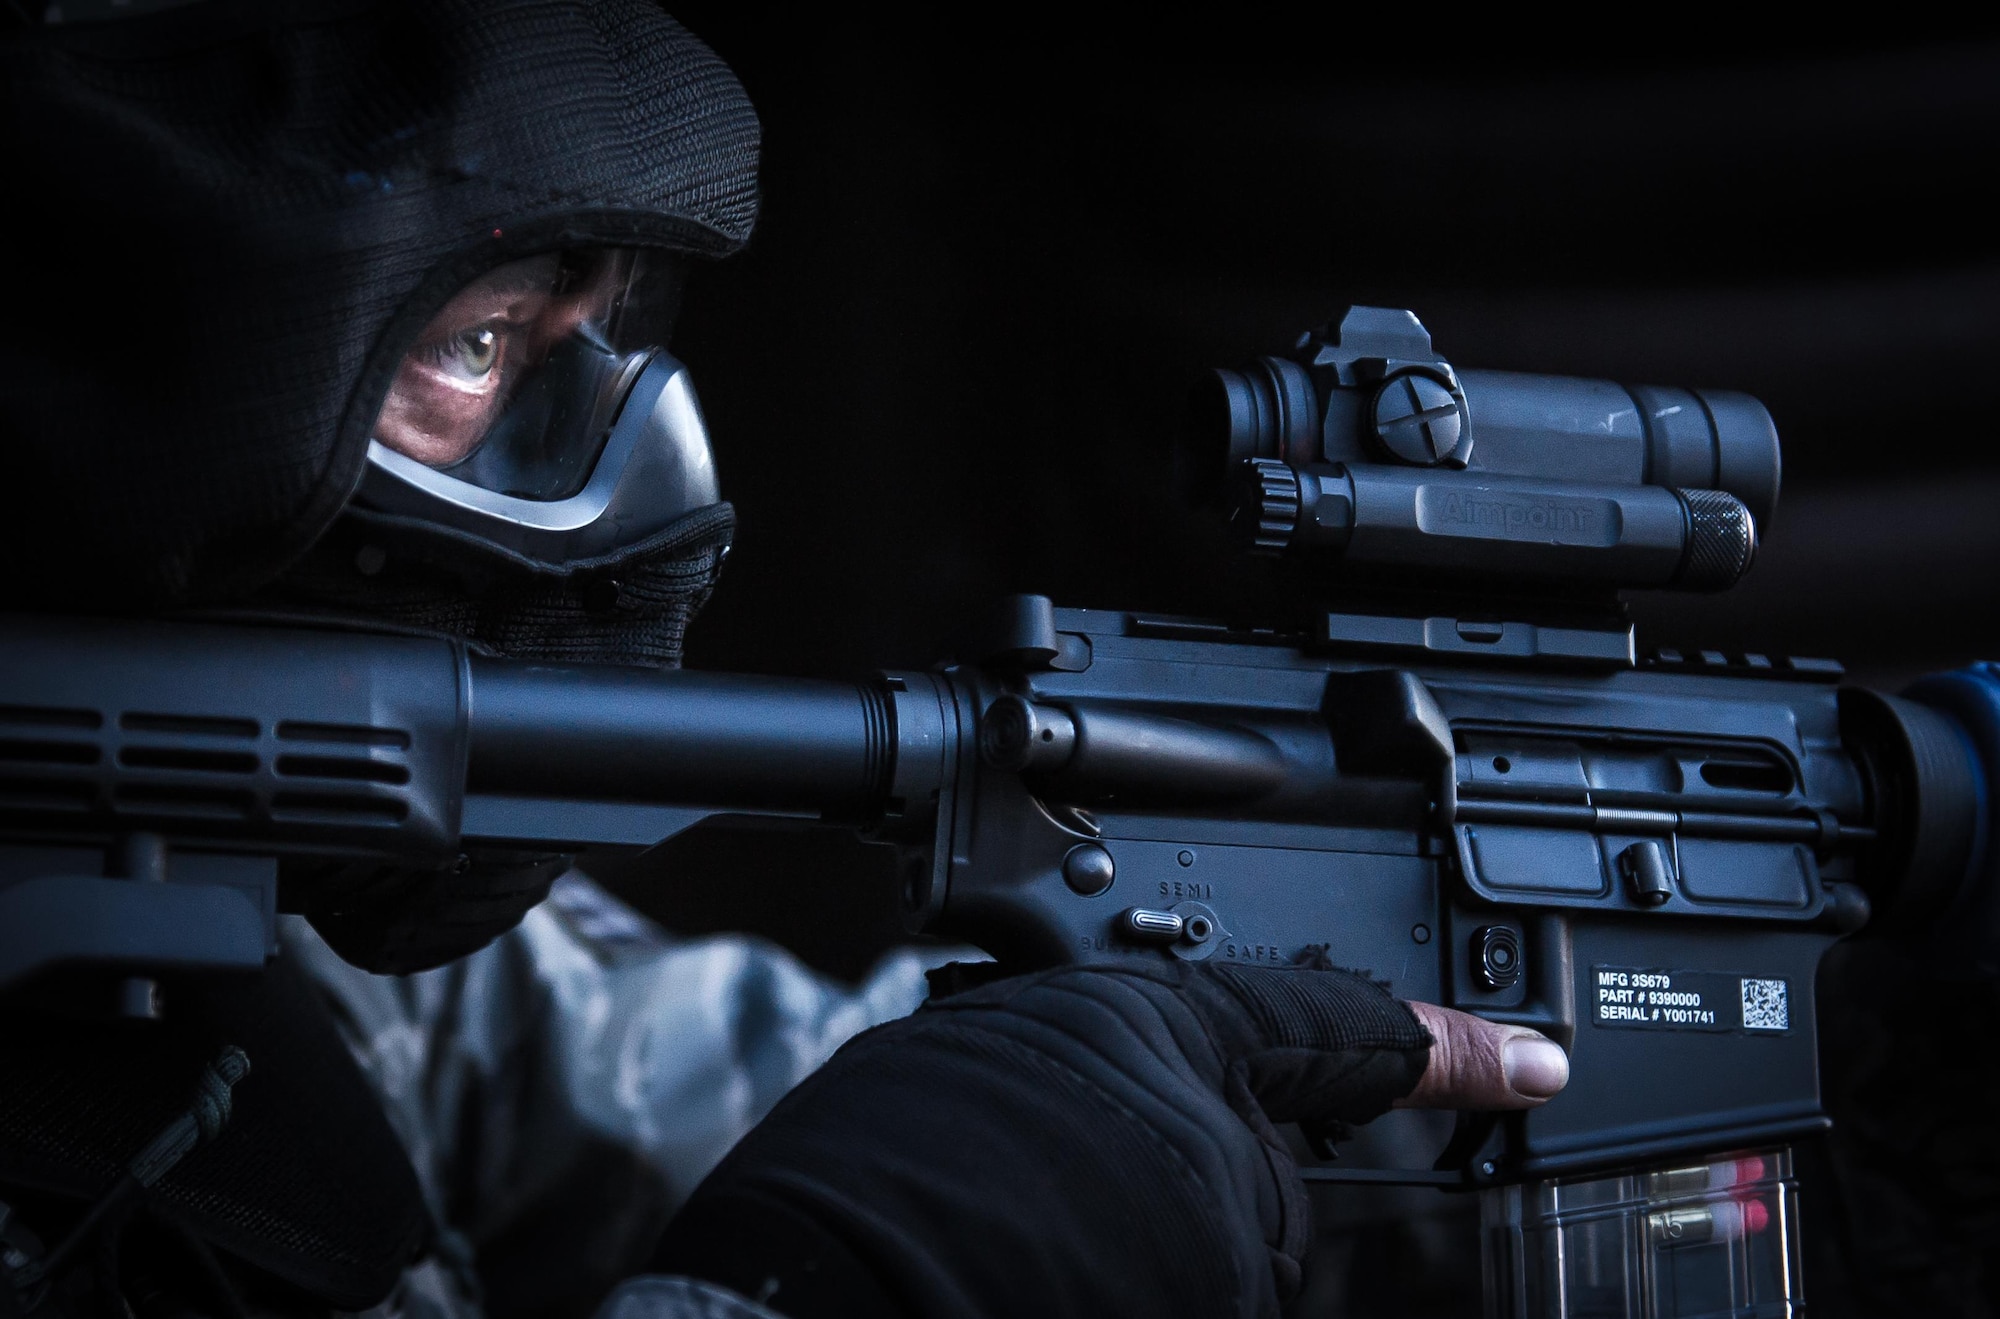 A security forces Airman secures the outside of a hardened facility after neutralizing the opposing force during a combat training course on Ramstein Air Base, Germany, May 30, 2015. The Battlefield Leaders Assaulter Course, Integrated Combat Essentials is designed to teach security forces members from multiple countries advanced tactics and shooting skills for use in the event of a base security breach. (U.S. Air Force photo/Tech. Sgt. Ryan Crane)